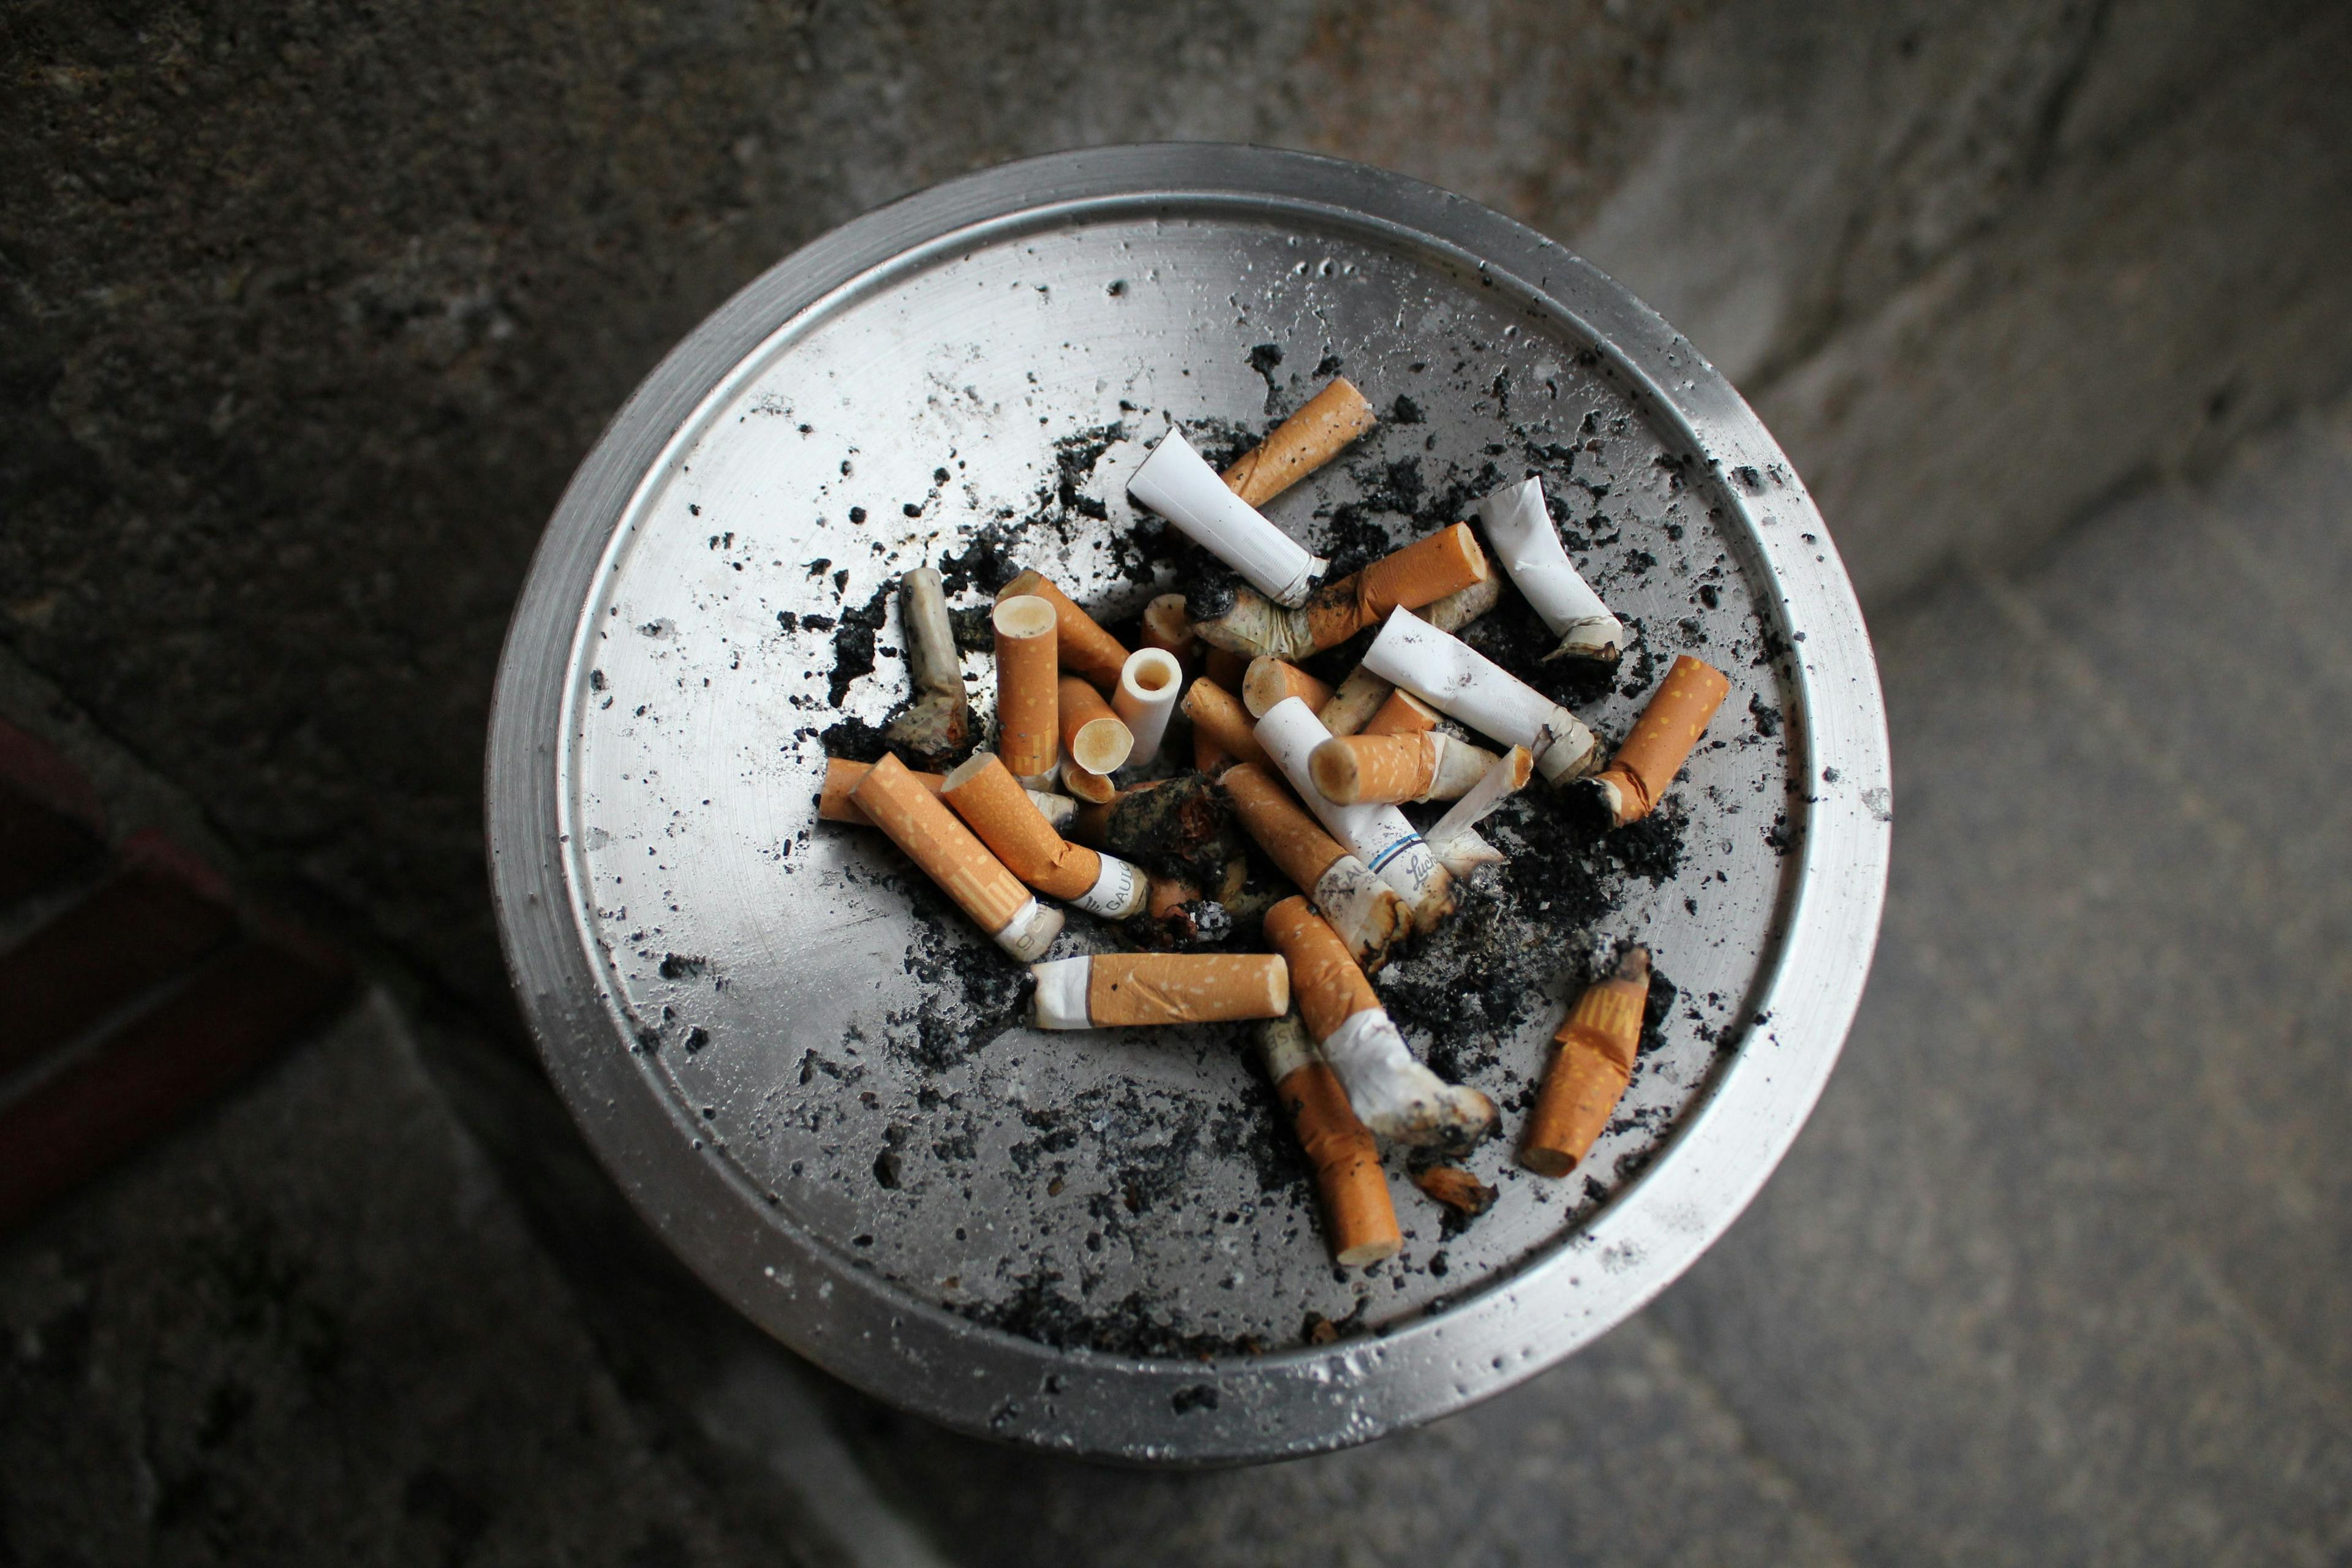 Continuing to Smoke After Bladder Cancer Diagnosis Increases Recurrence Risk